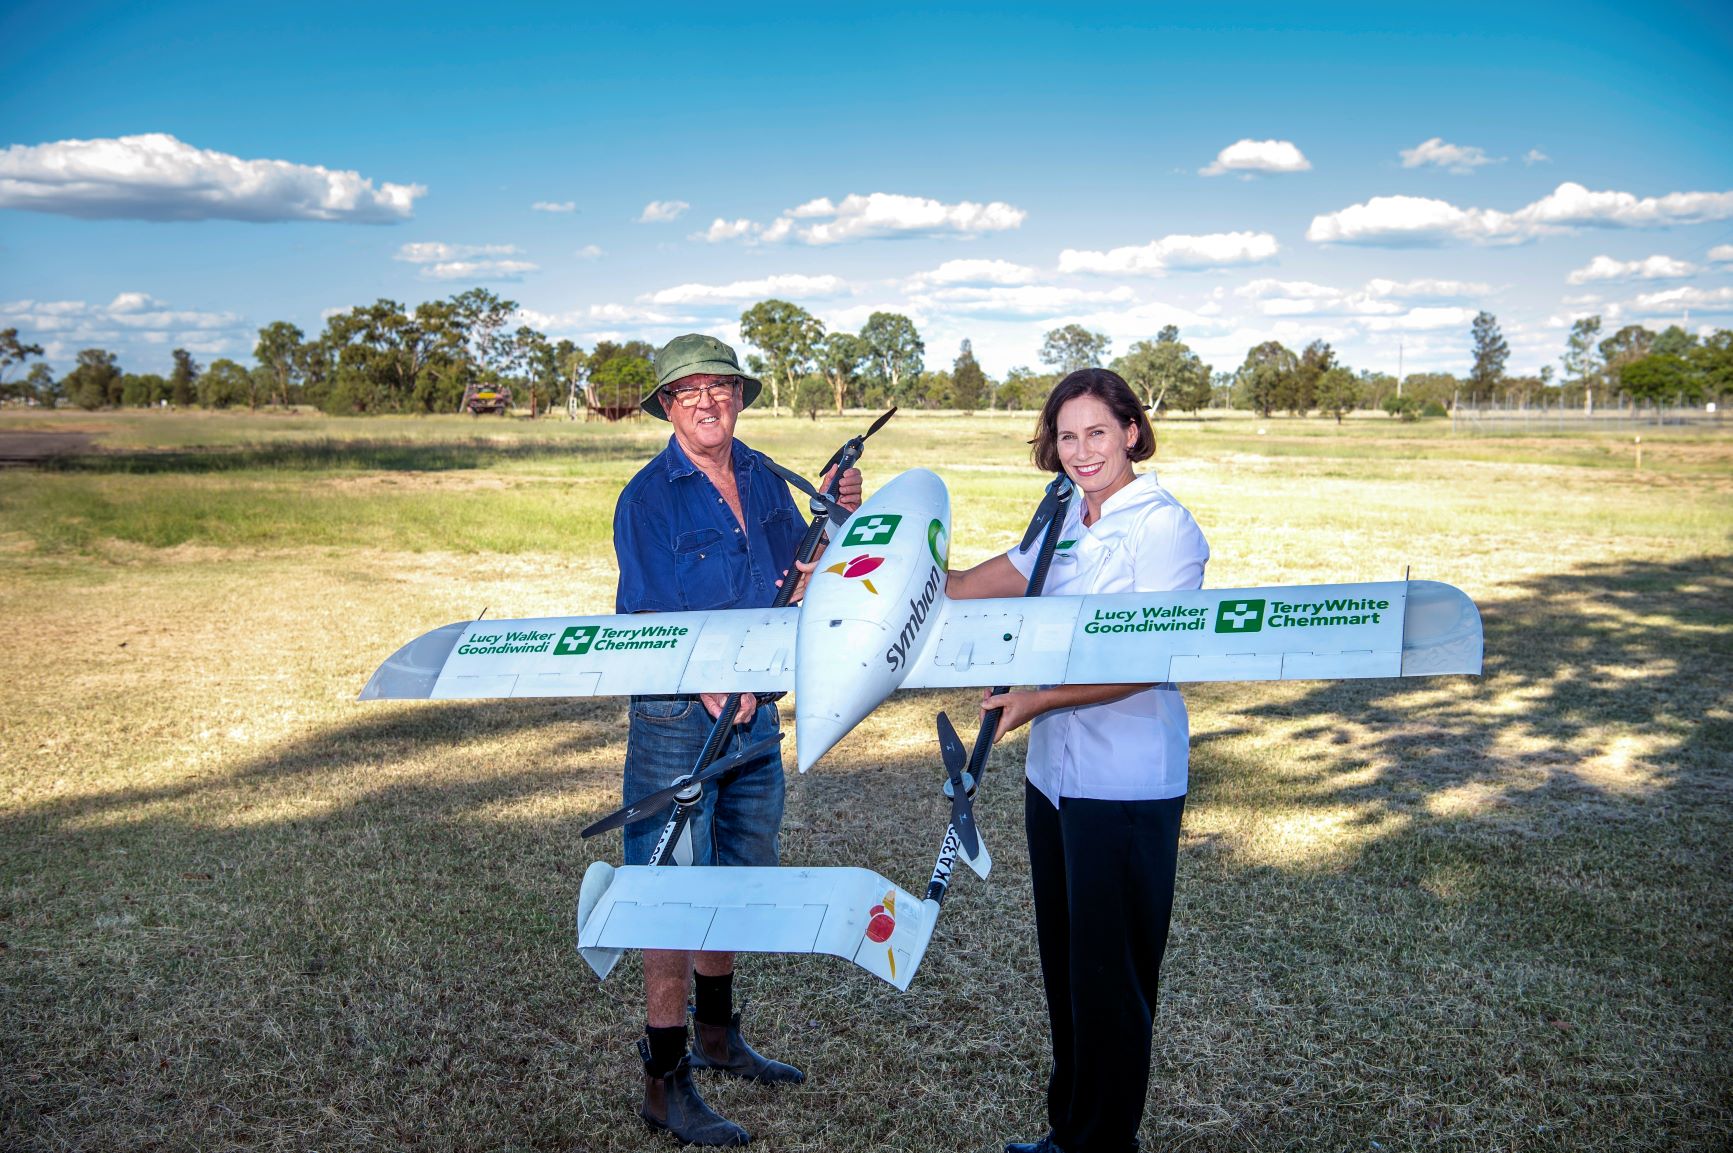 Drone project make more accessible - Retail Pharmacy Assistants